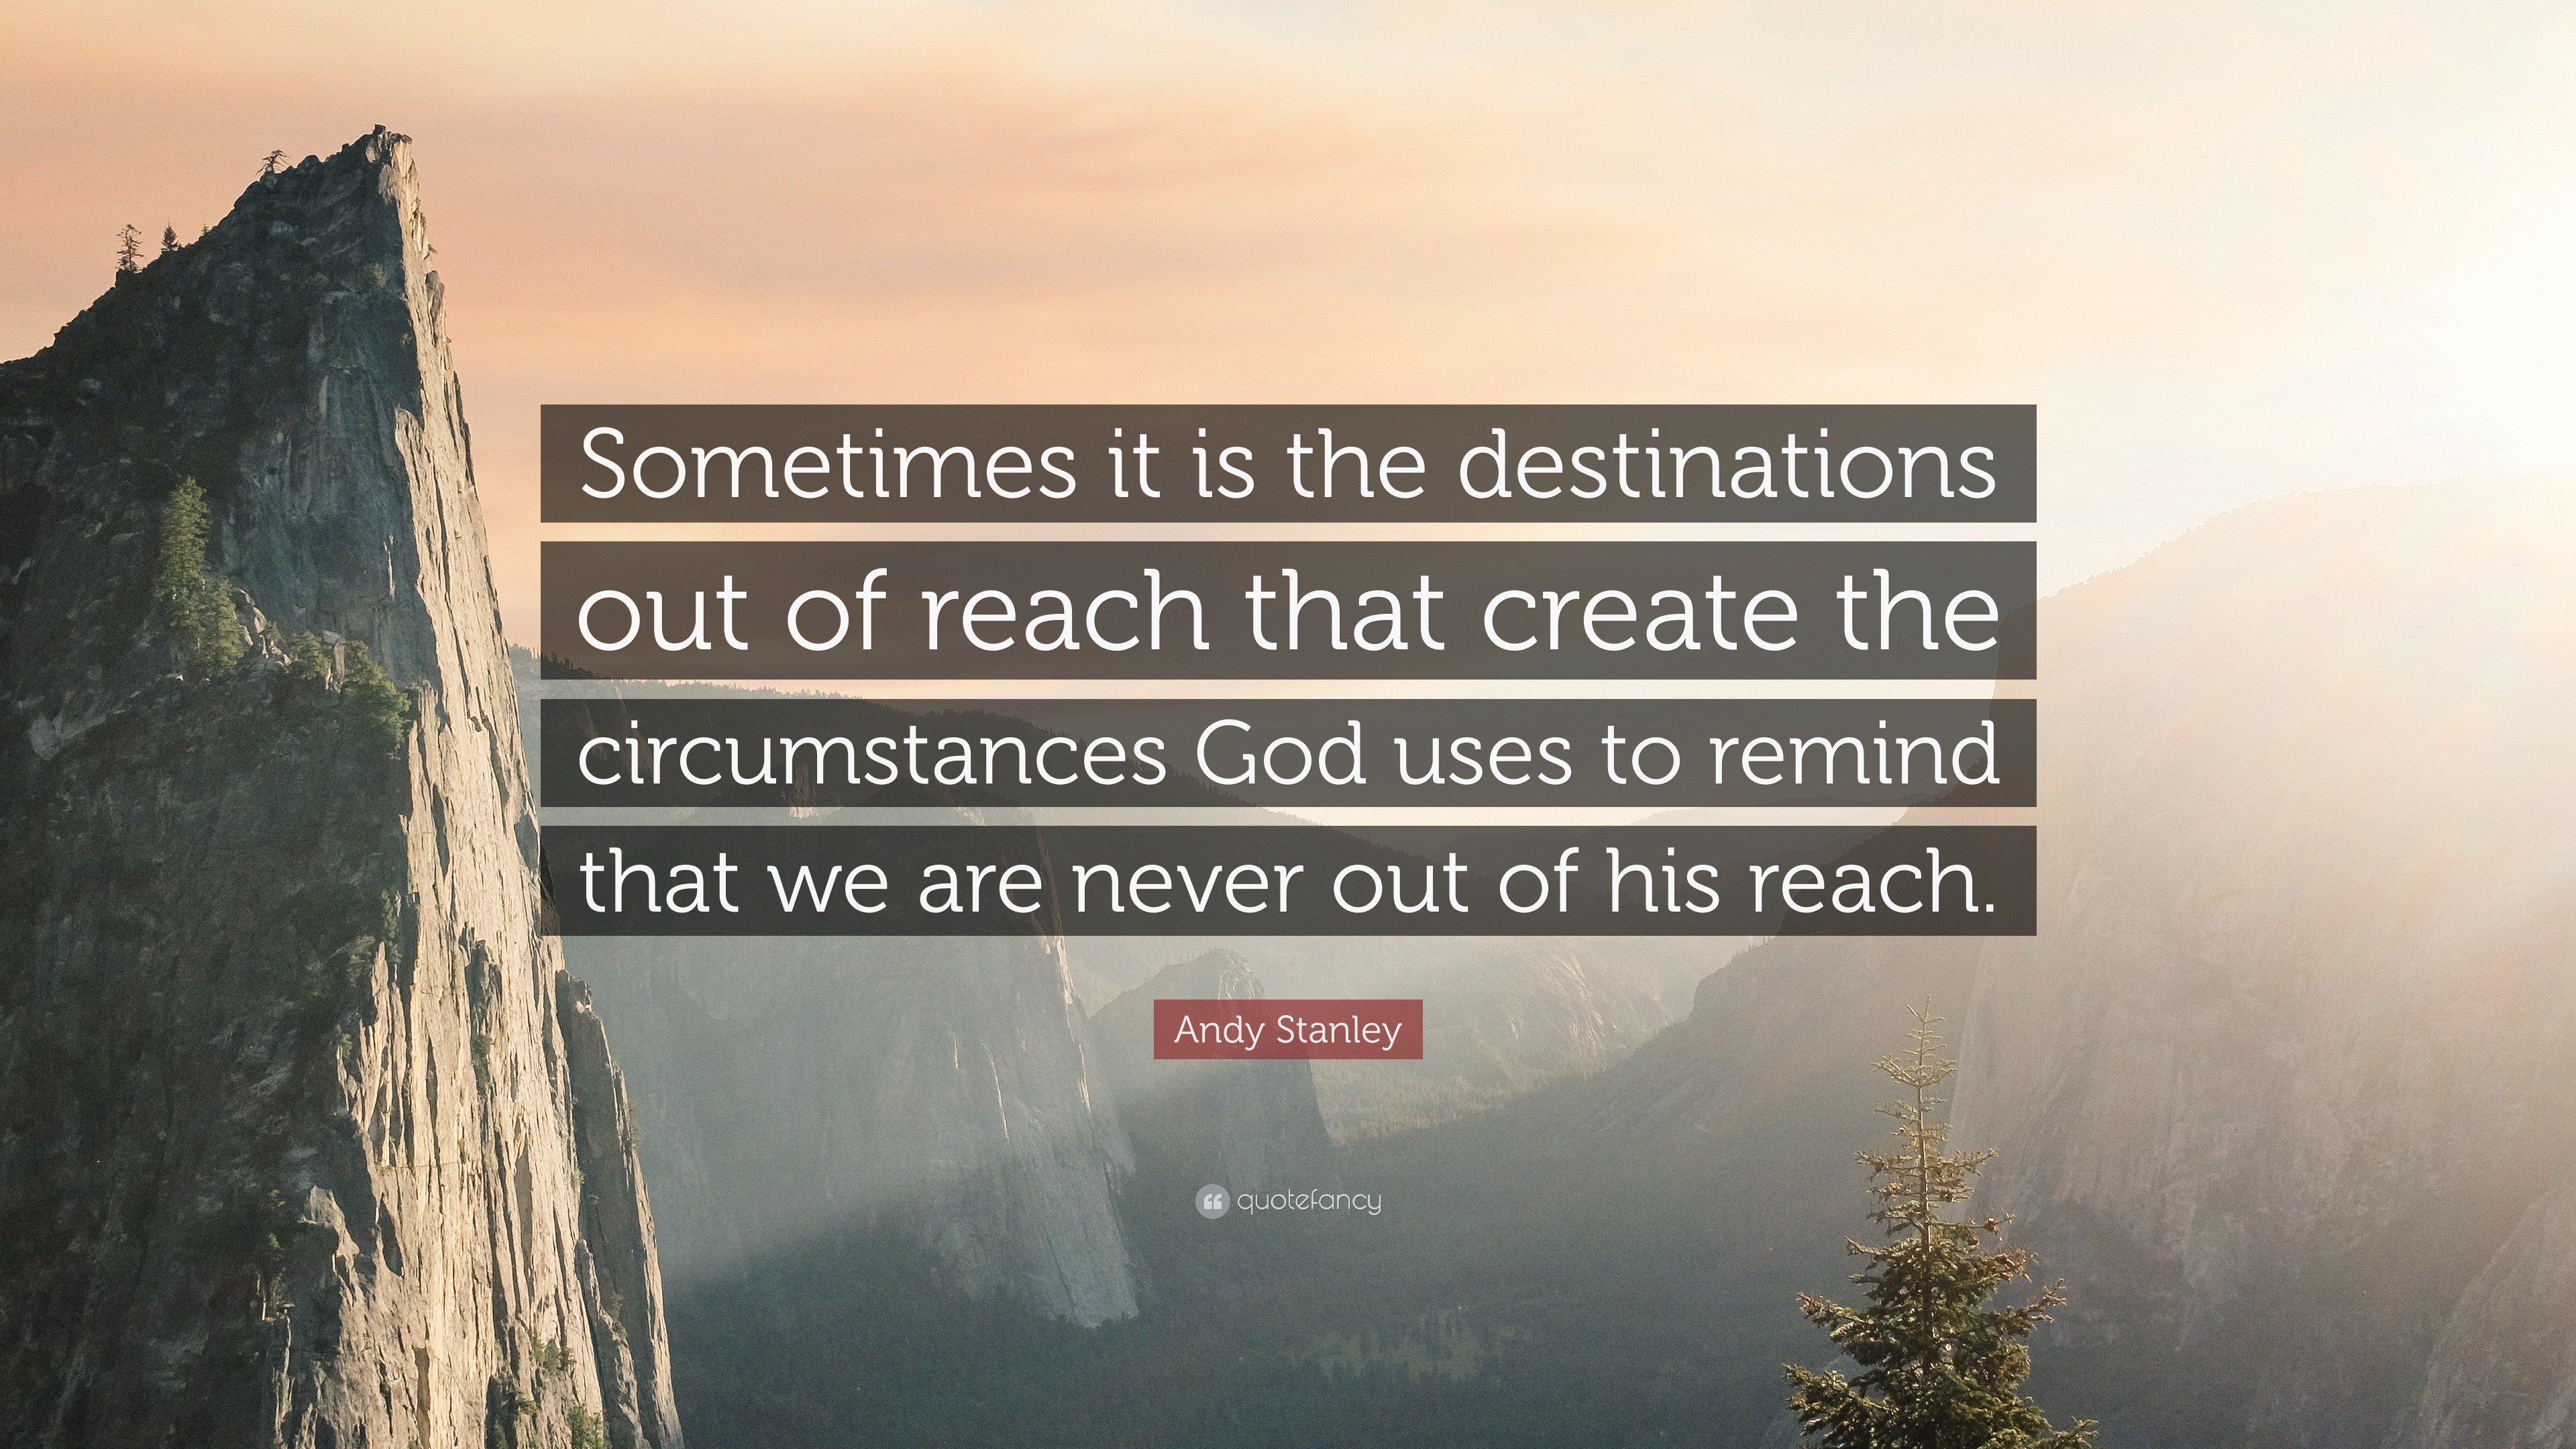 https://quotefancy.com/media/wallpaper/3840x2160/548691-Andy-Stanley-Quote-Sometimes-it-is-the-destinations-out-of-reach.jpg